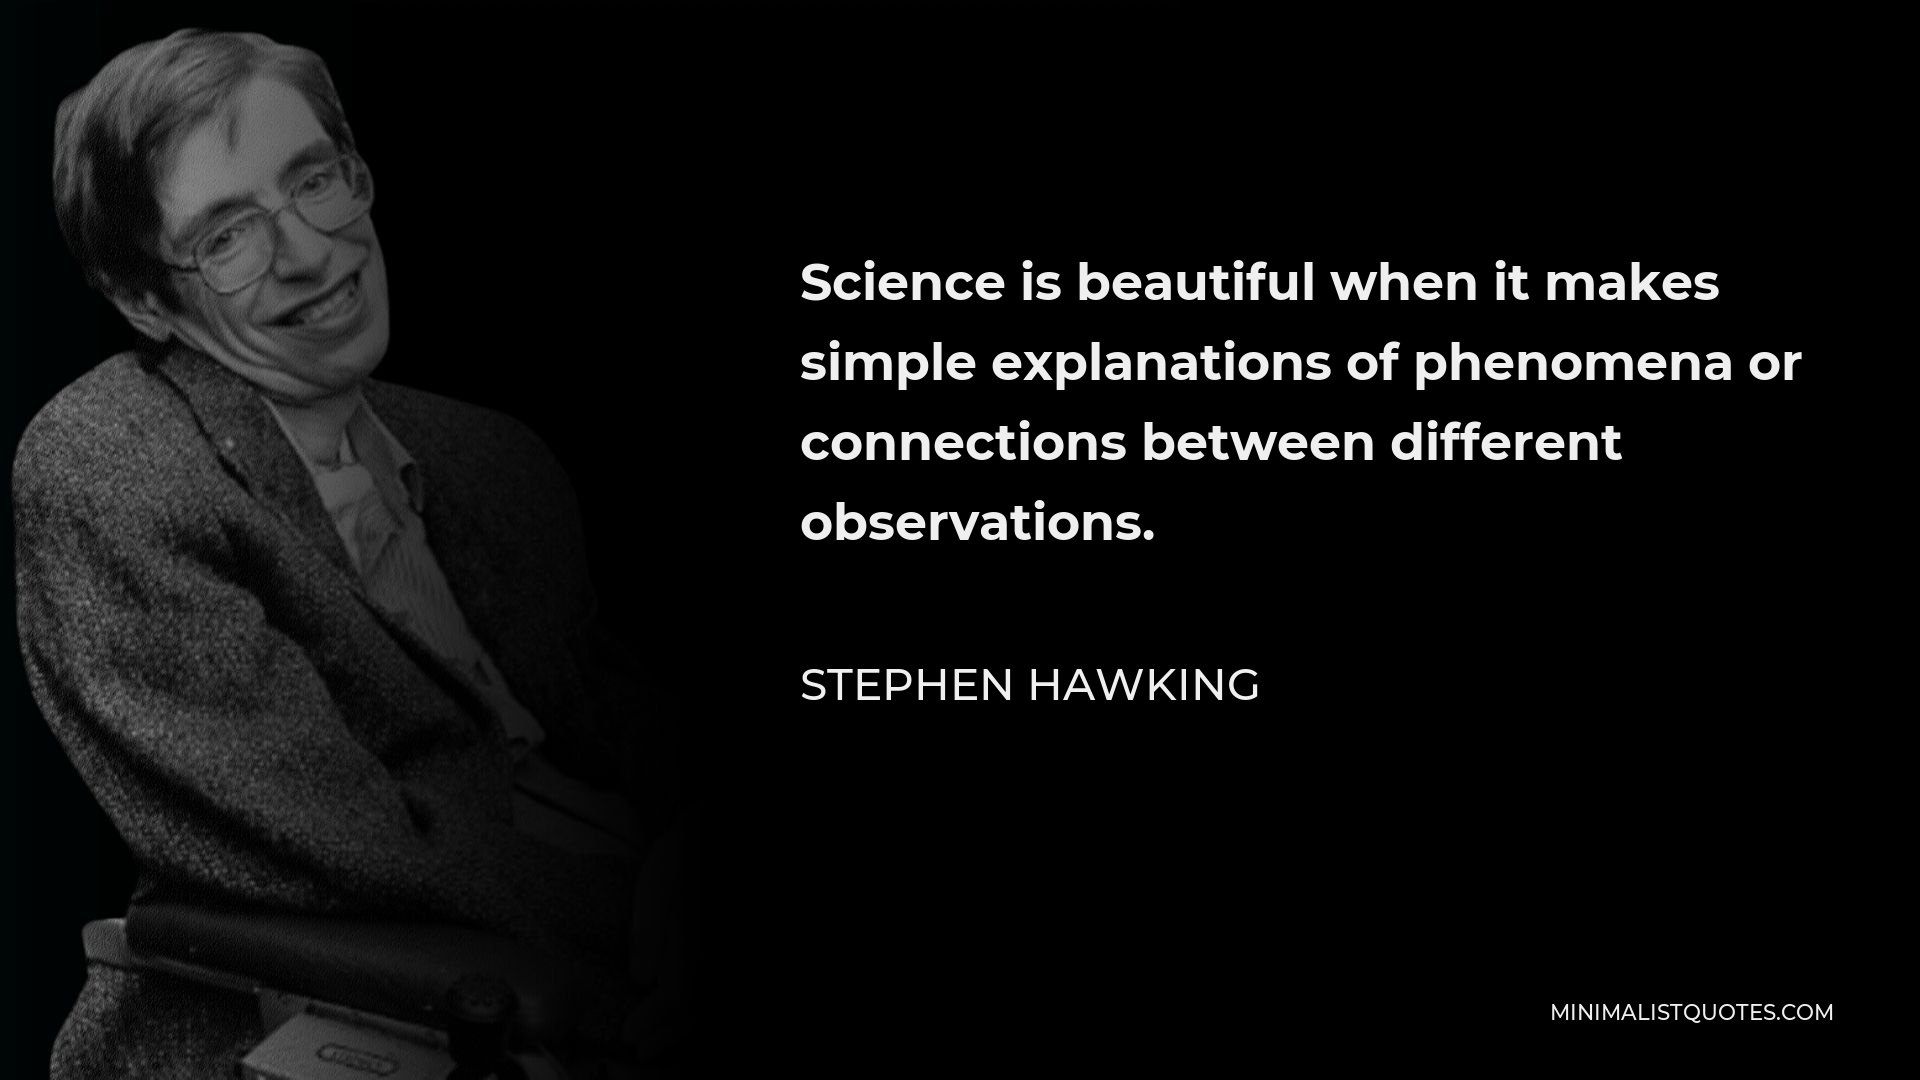 Stephen Hawking Quote - Science is beautiful when it makes simple explanations of phenomena or connections between different observations.